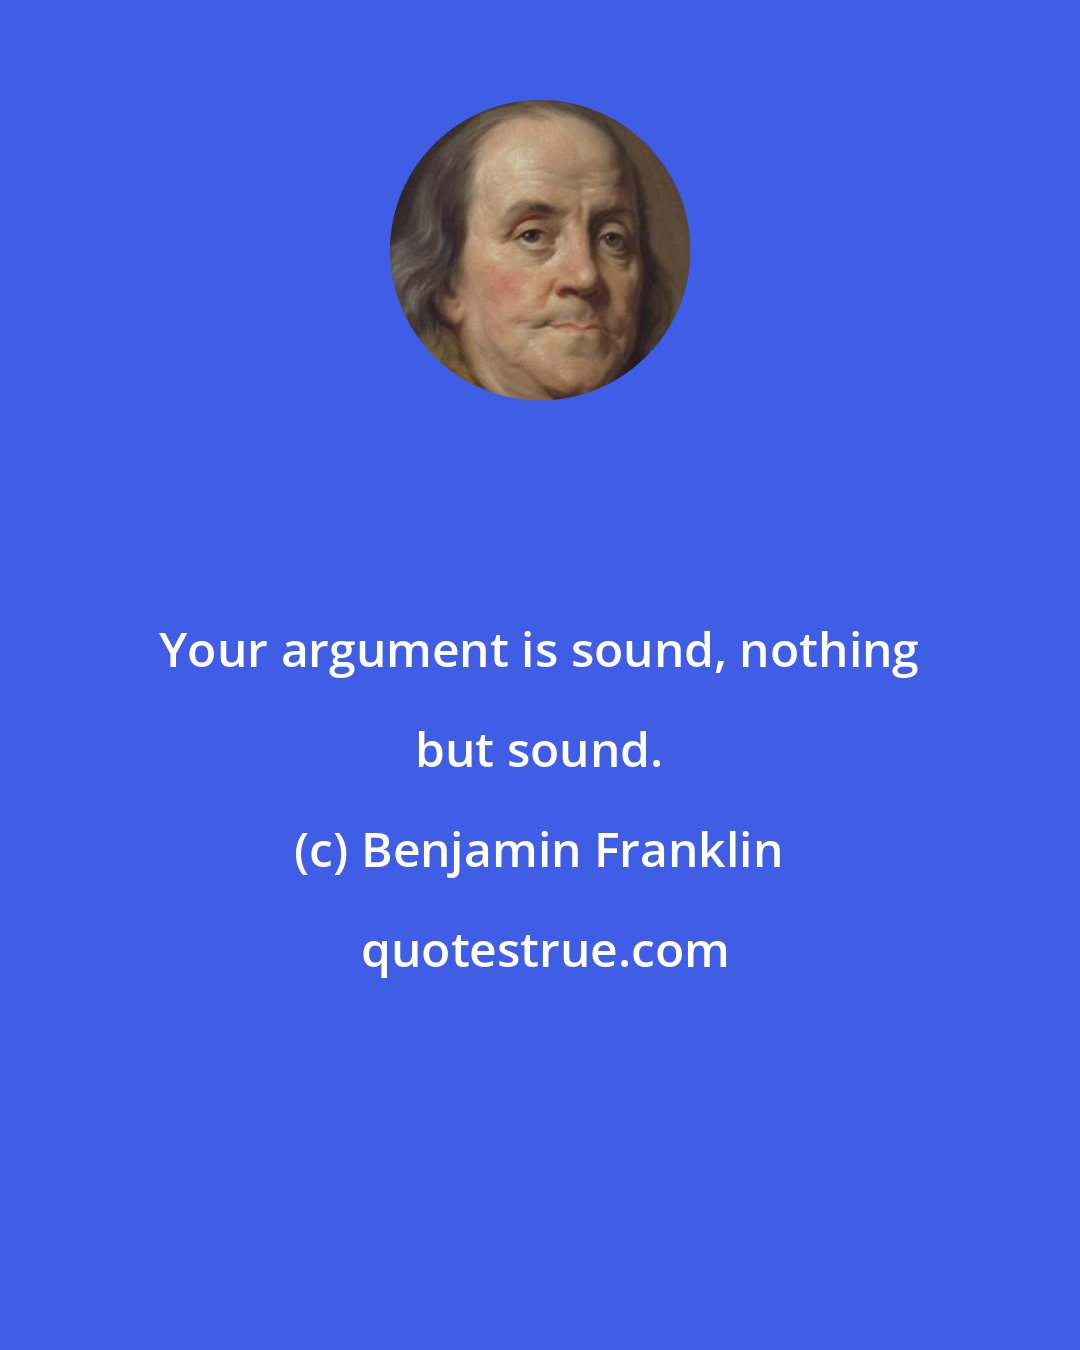 Benjamin Franklin: Your argument is sound, nothing but sound.